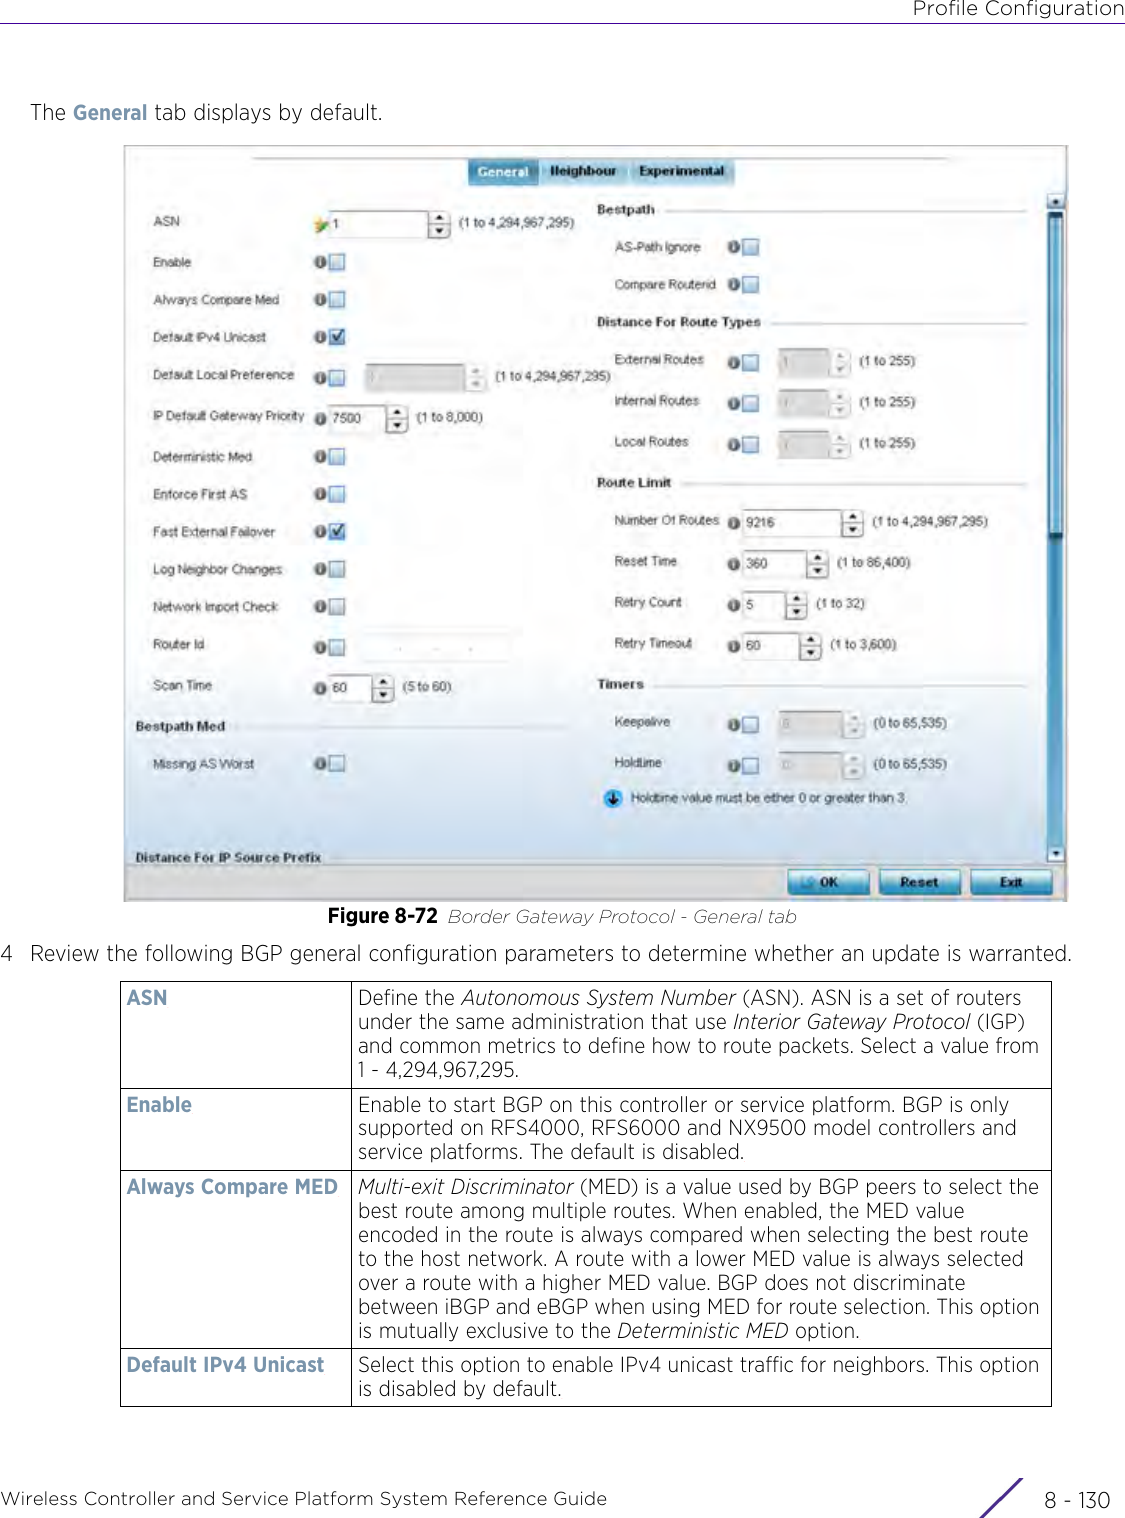 Profile ConfigurationWireless Controller and Service Platform System Reference Guide  8 - 130The General tab displays by default.Figure 8-72 Border Gateway Protocol - General tab4 Review the following BGP general configuration parameters to determine whether an update is warranted.ASN Define the Autonomous System Number (ASN). ASN is a set of routers under the same administration that use Interior Gateway Protocol (IGP) and common metrics to define how to route packets. Select a value from 1 - 4,294,967,295.Enable Enable to start BGP on this controller or service platform. BGP is only supported on RFS4000, RFS6000 and NX9500 model controllers and service platforms. The default is disabled.Always Compare MED Multi-exit Discriminator (MED) is a value used by BGP peers to select the best route among multiple routes. When enabled, the MED value encoded in the route is always compared when selecting the best route to the host network. A route with a lower MED value is always selected over a route with a higher MED value. BGP does not discriminate between iBGP and eBGP when using MED for route selection. This option is mutually exclusive to the Deterministic MED option.Default IPv4 Unicast Select this option to enable IPv4 unicast traffic for neighbors. This option is disabled by default.